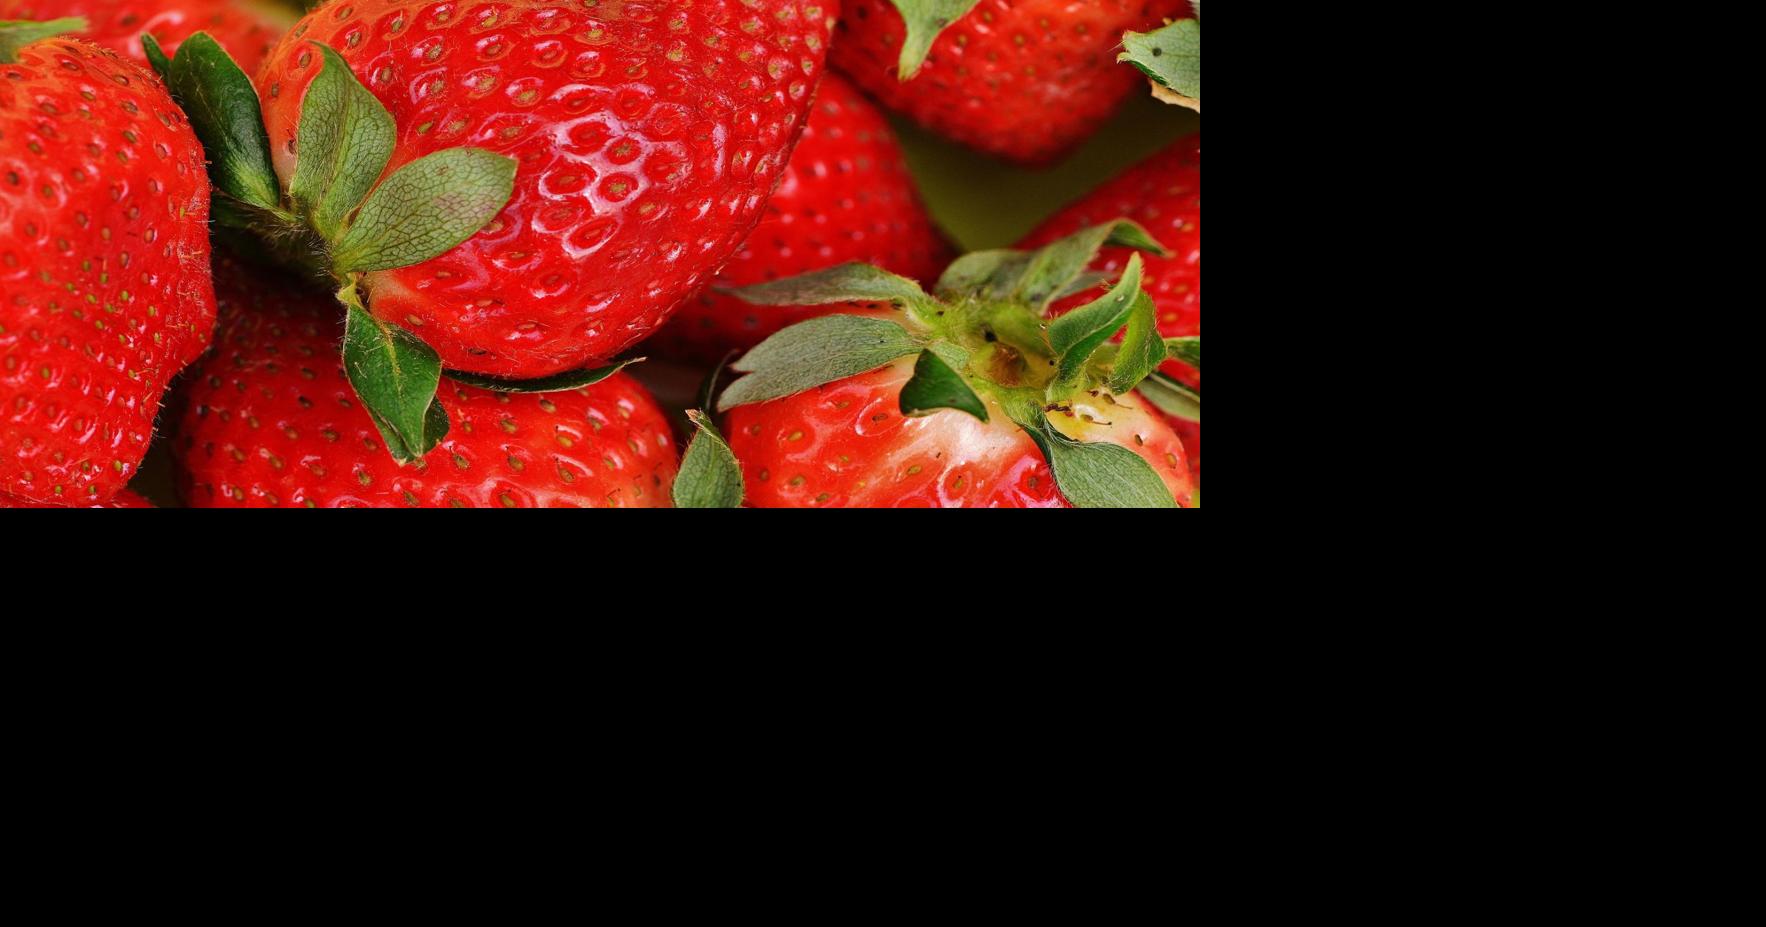 Strawberry Winter Protection: Straw Mulch vs. Row Covers